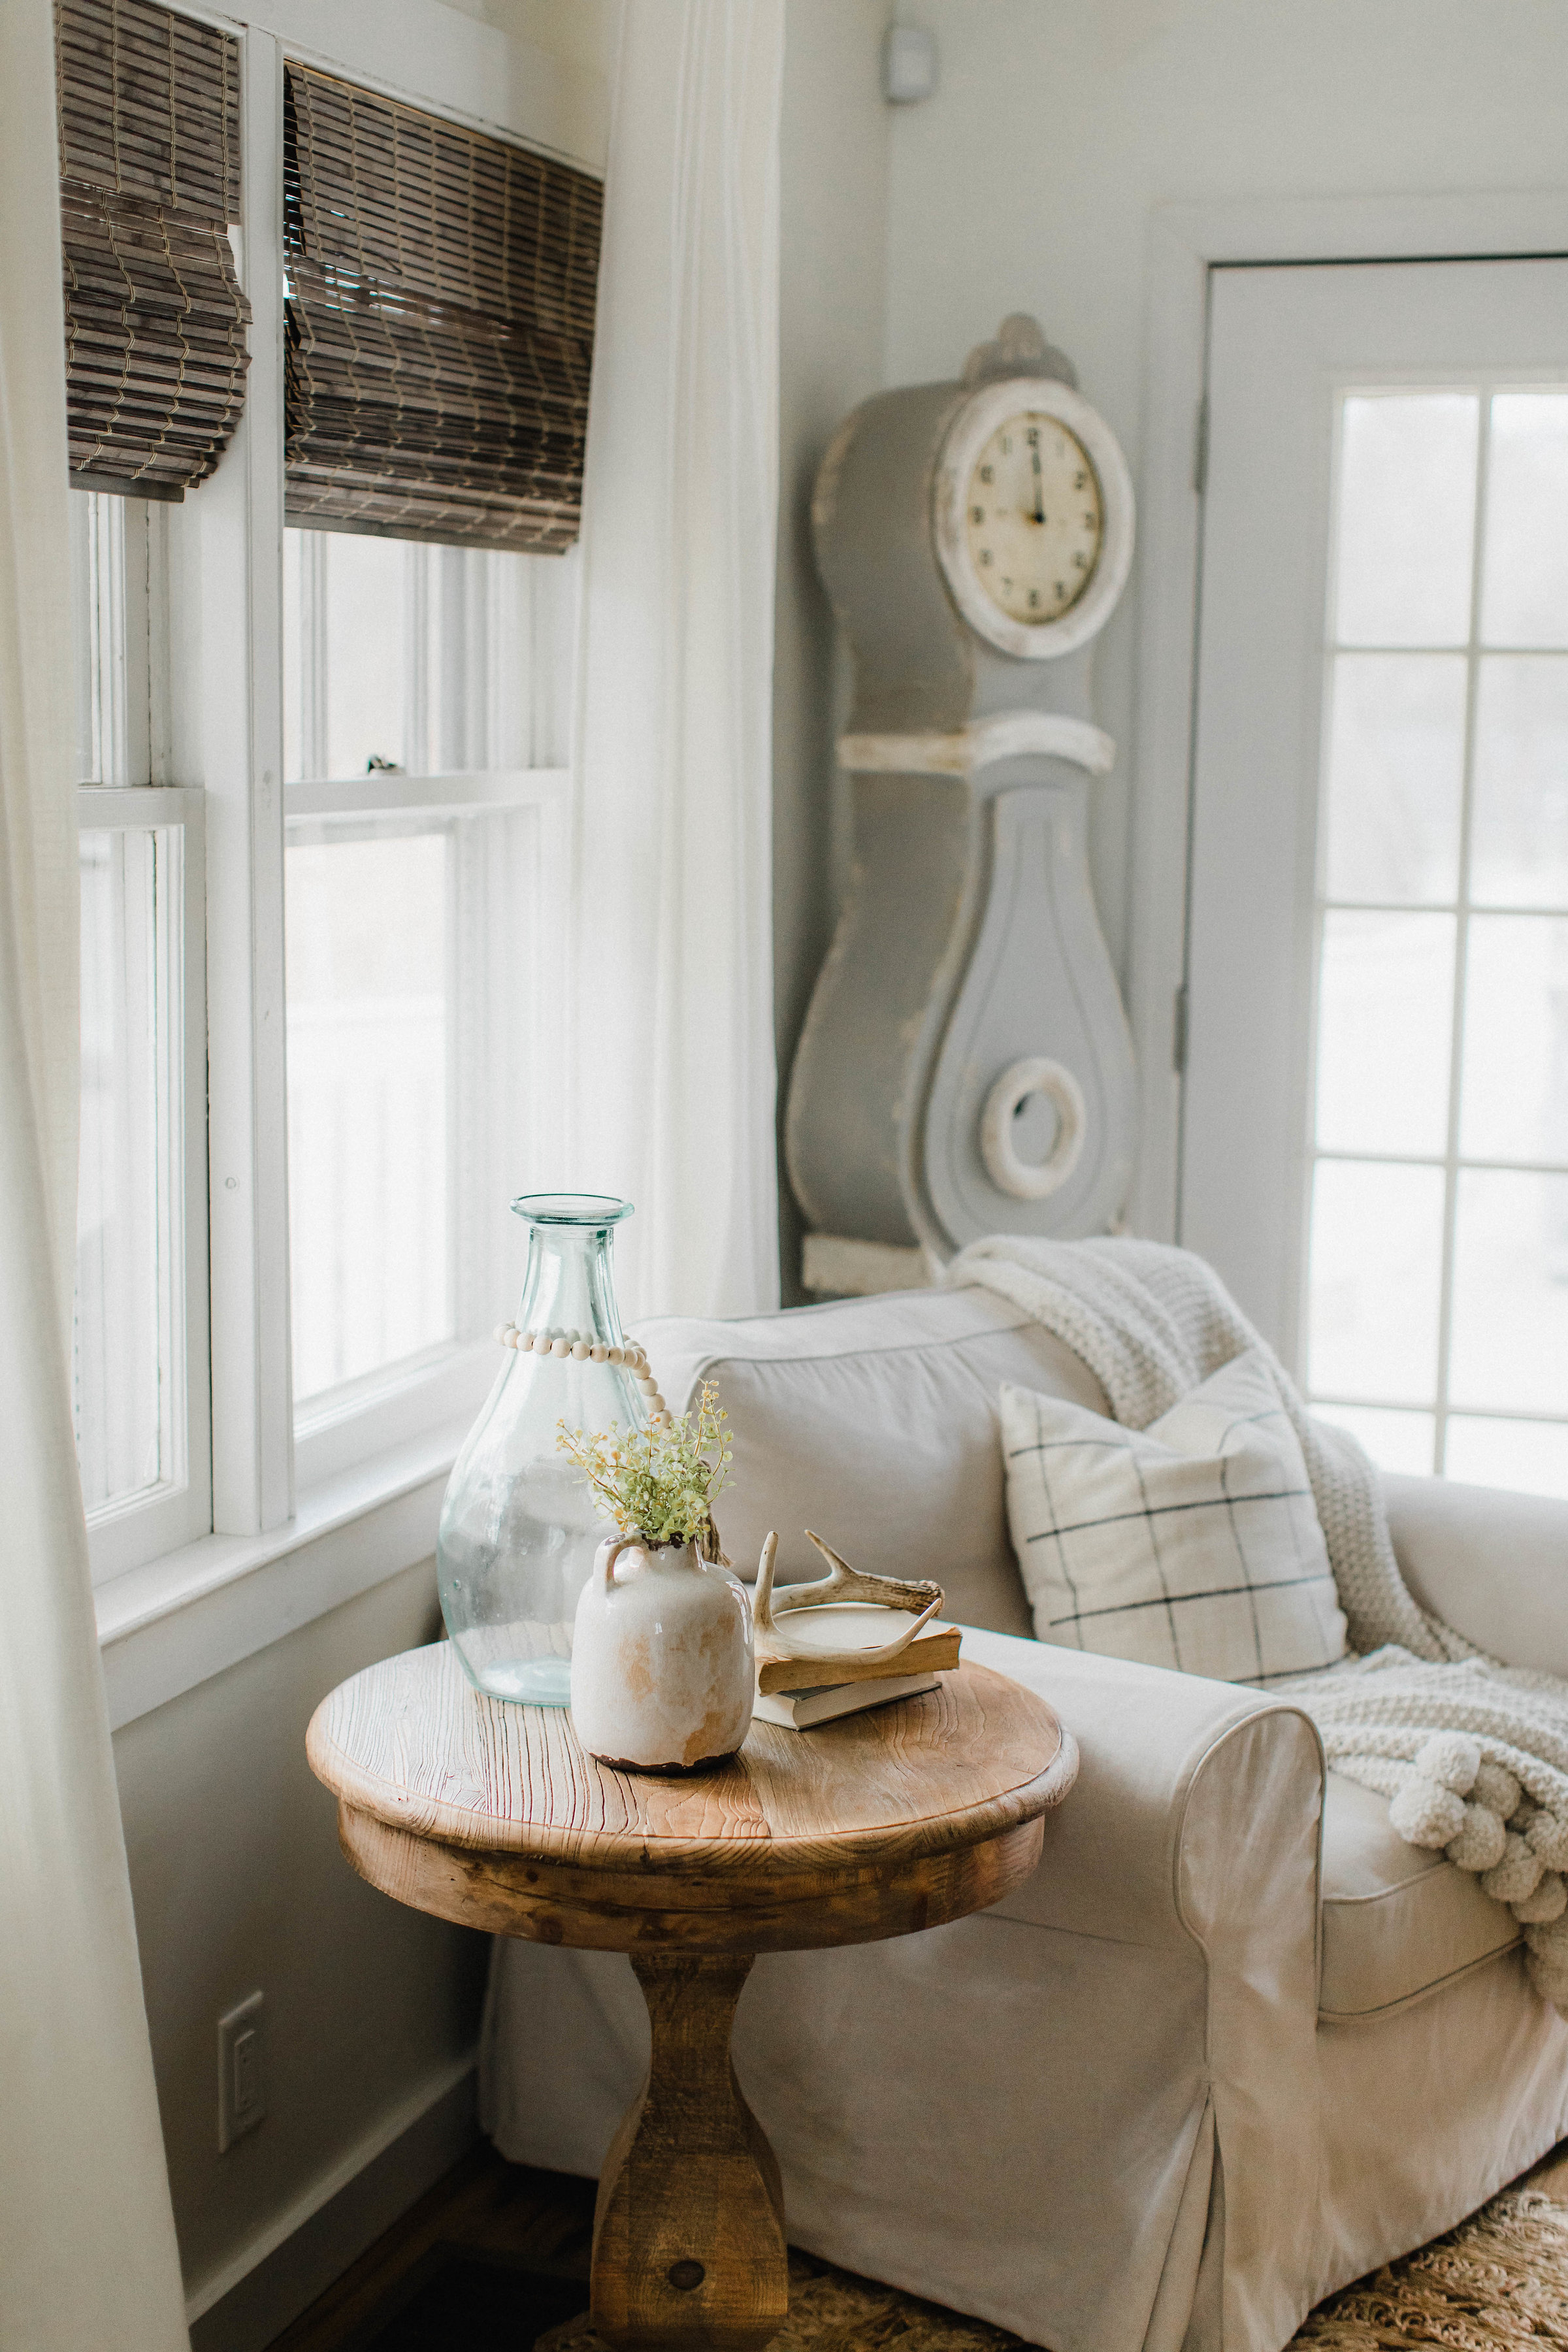 Life and style blogger Lauren McBride give a sneak peek into her Painted Fox Home curated collection.